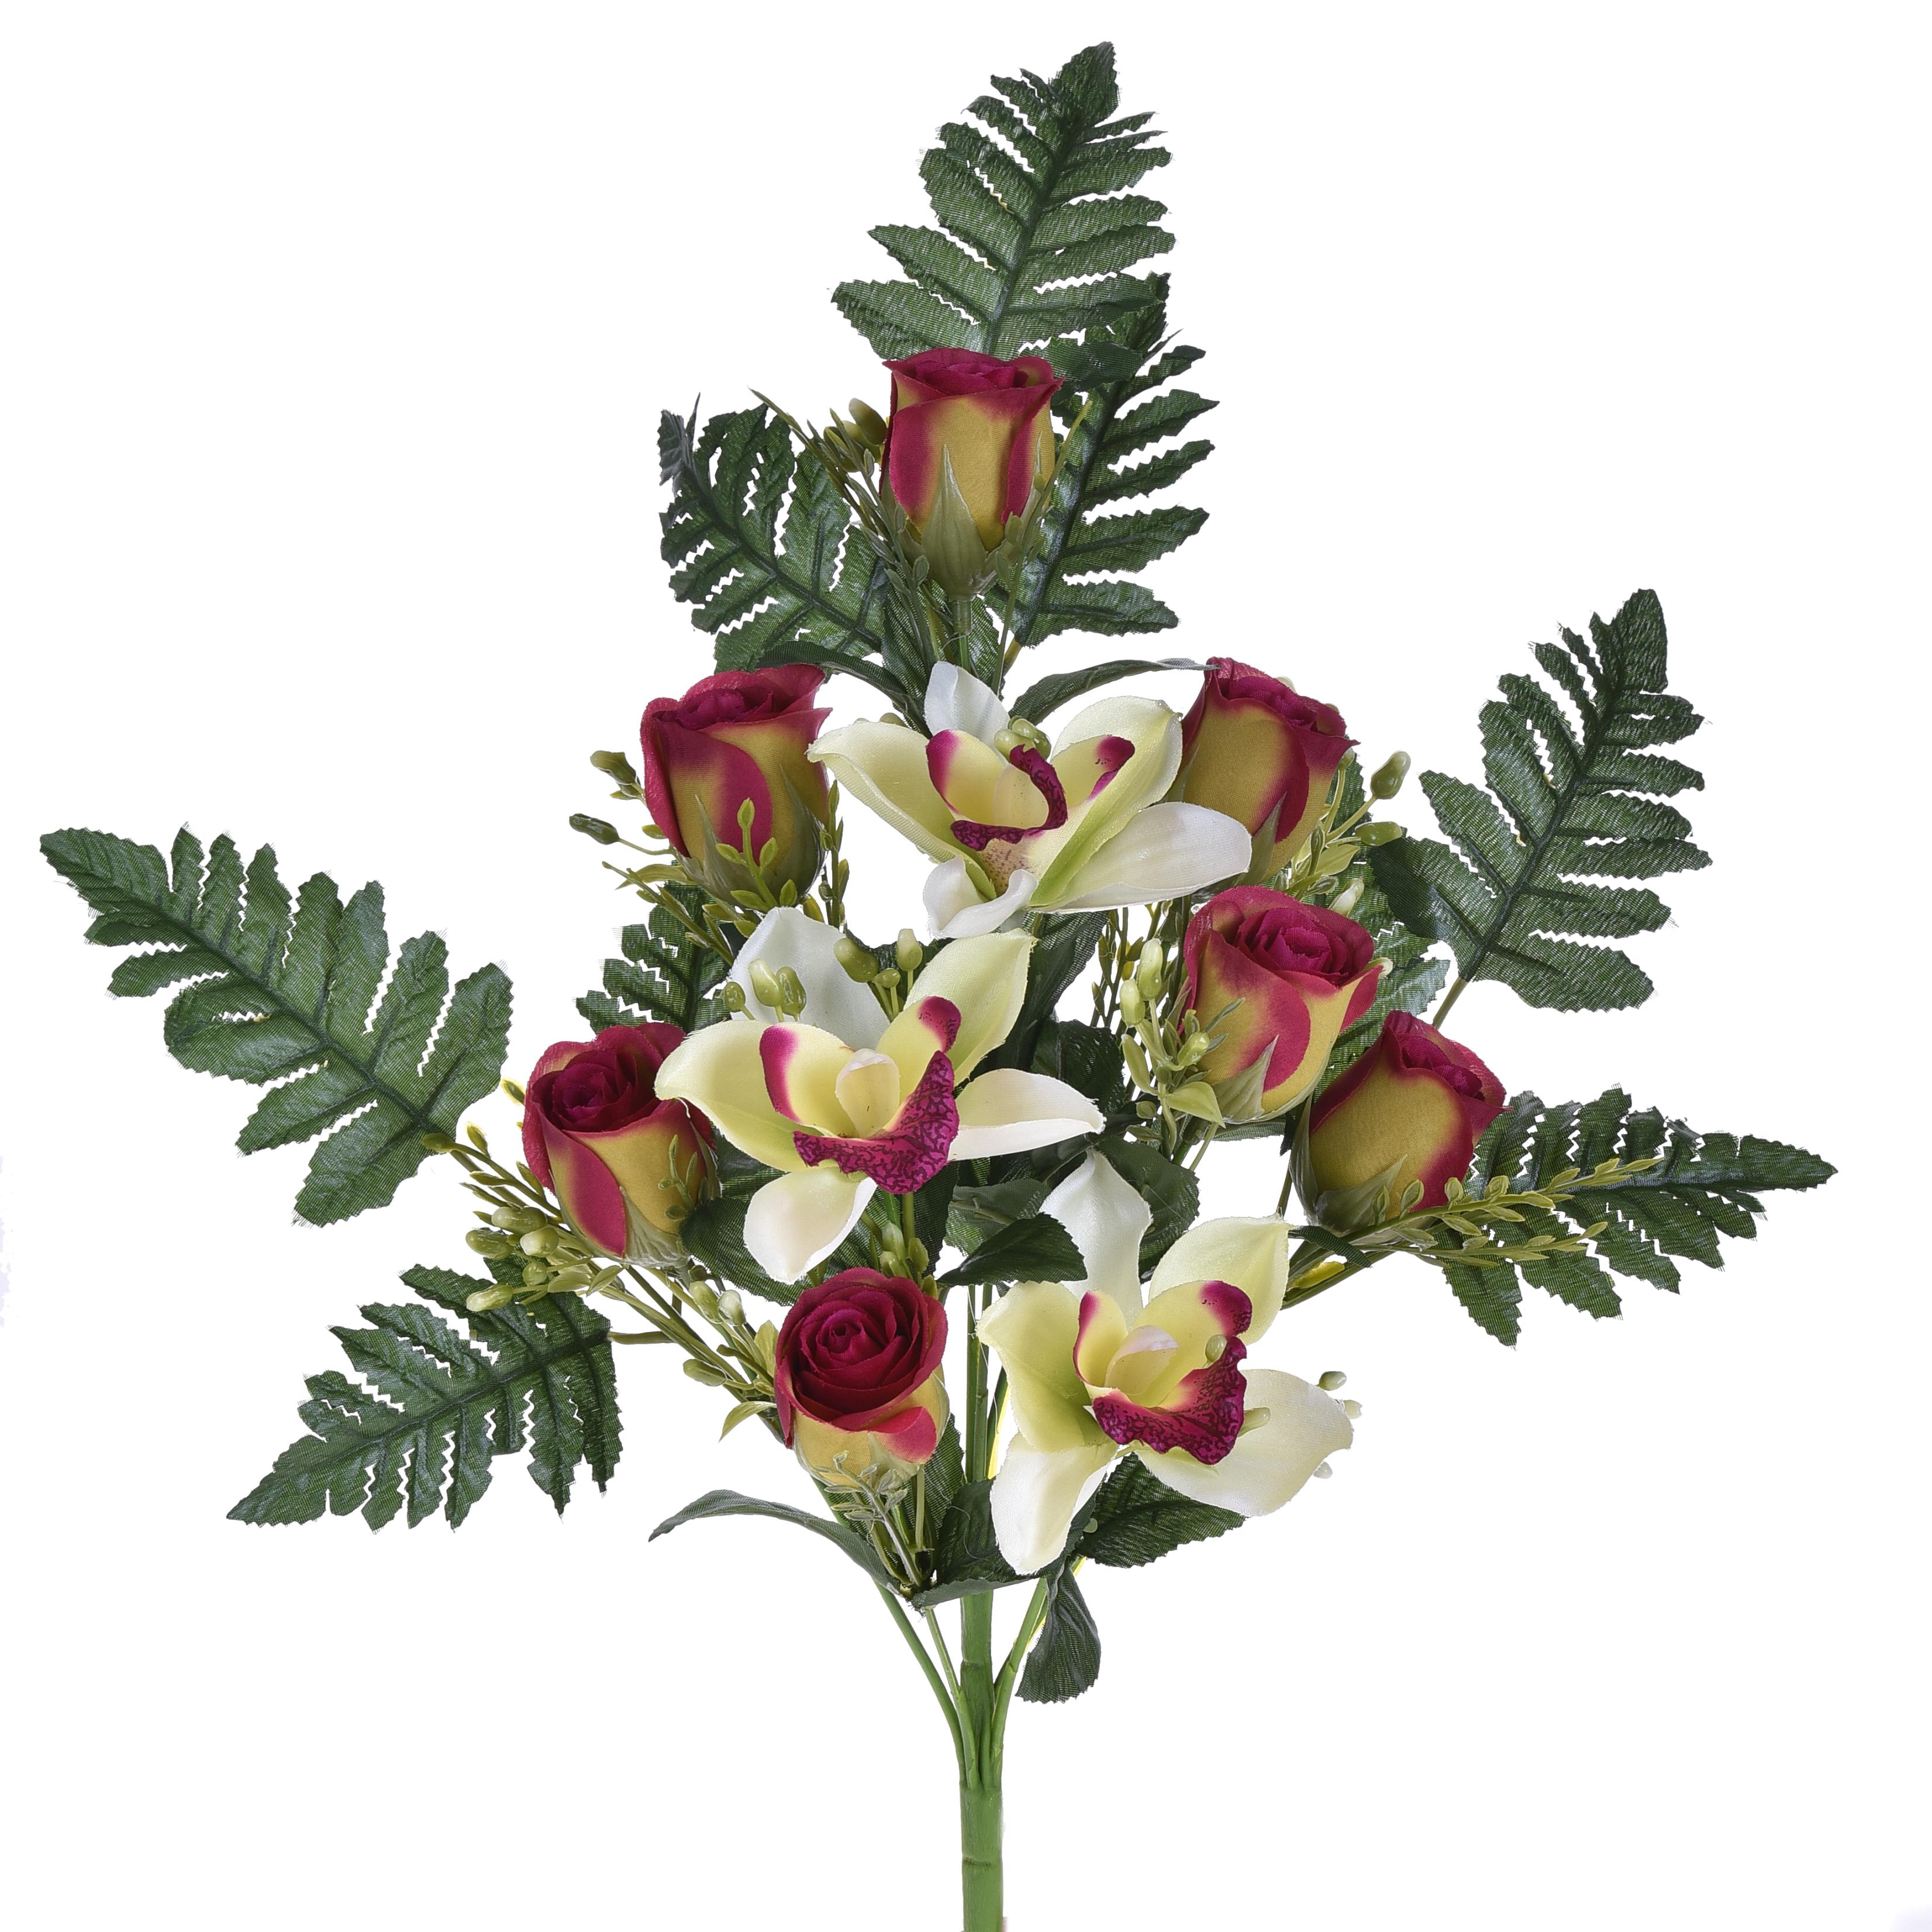 ARTIFICIAL FLOWERS, FRONTAL FLOWERED BUSHES, FRONTALE CYMBIDIUM/ROSE 43 CM